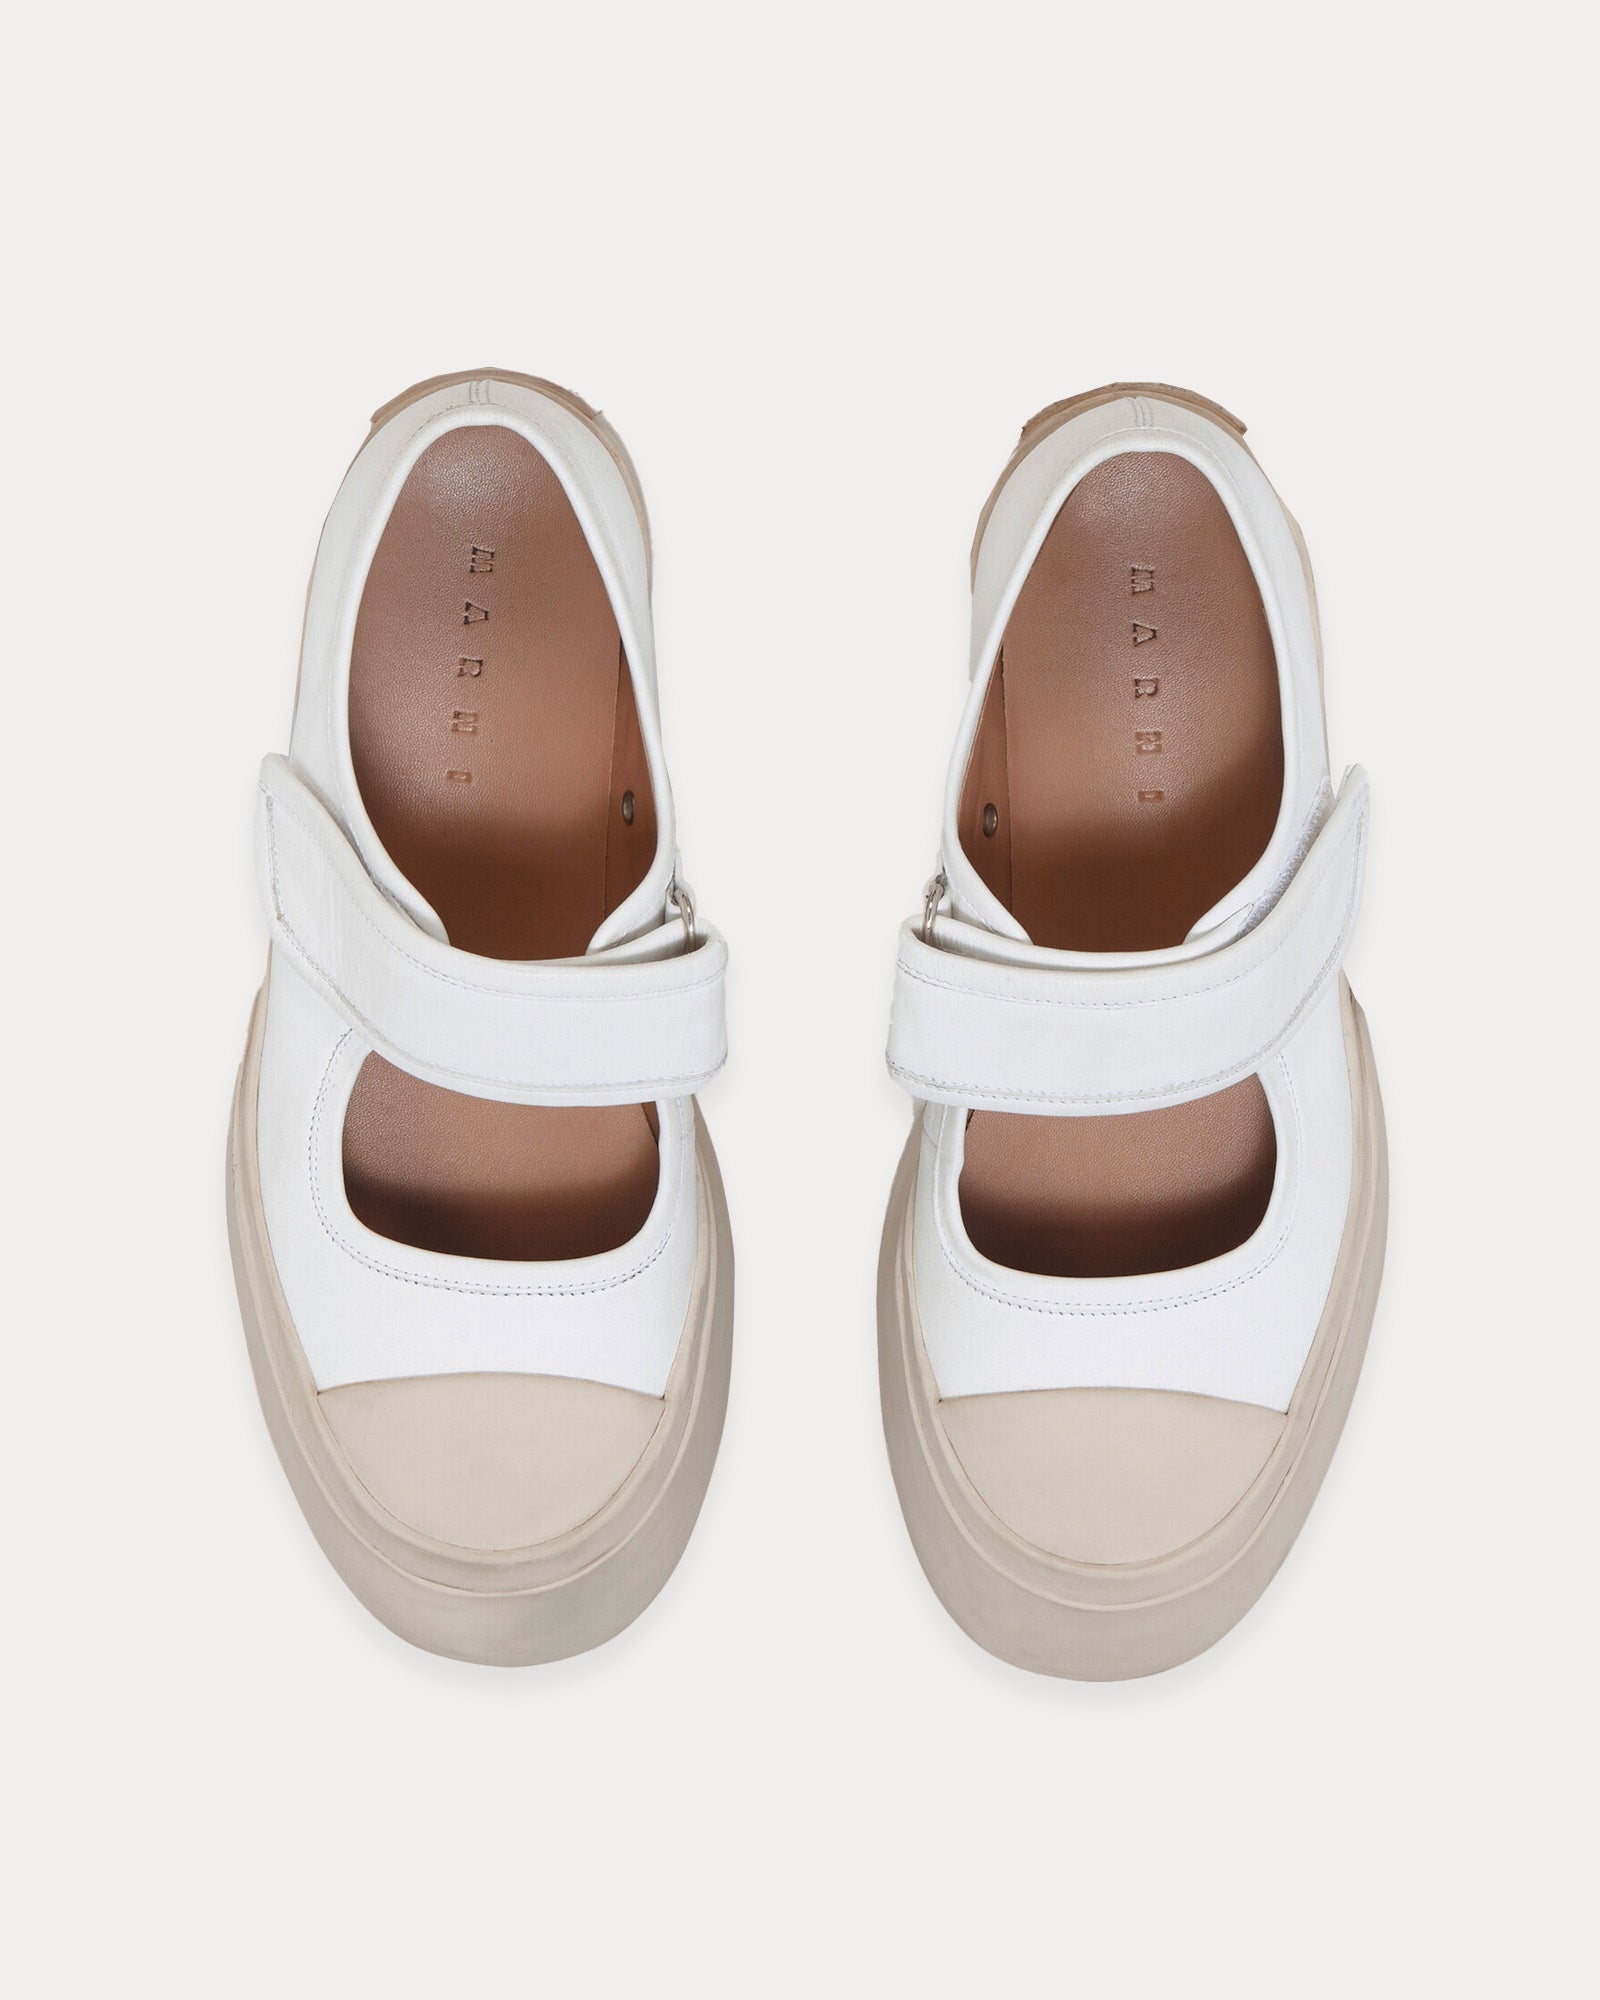 Marni - Mary Jane Leather White Slip On Sneakers